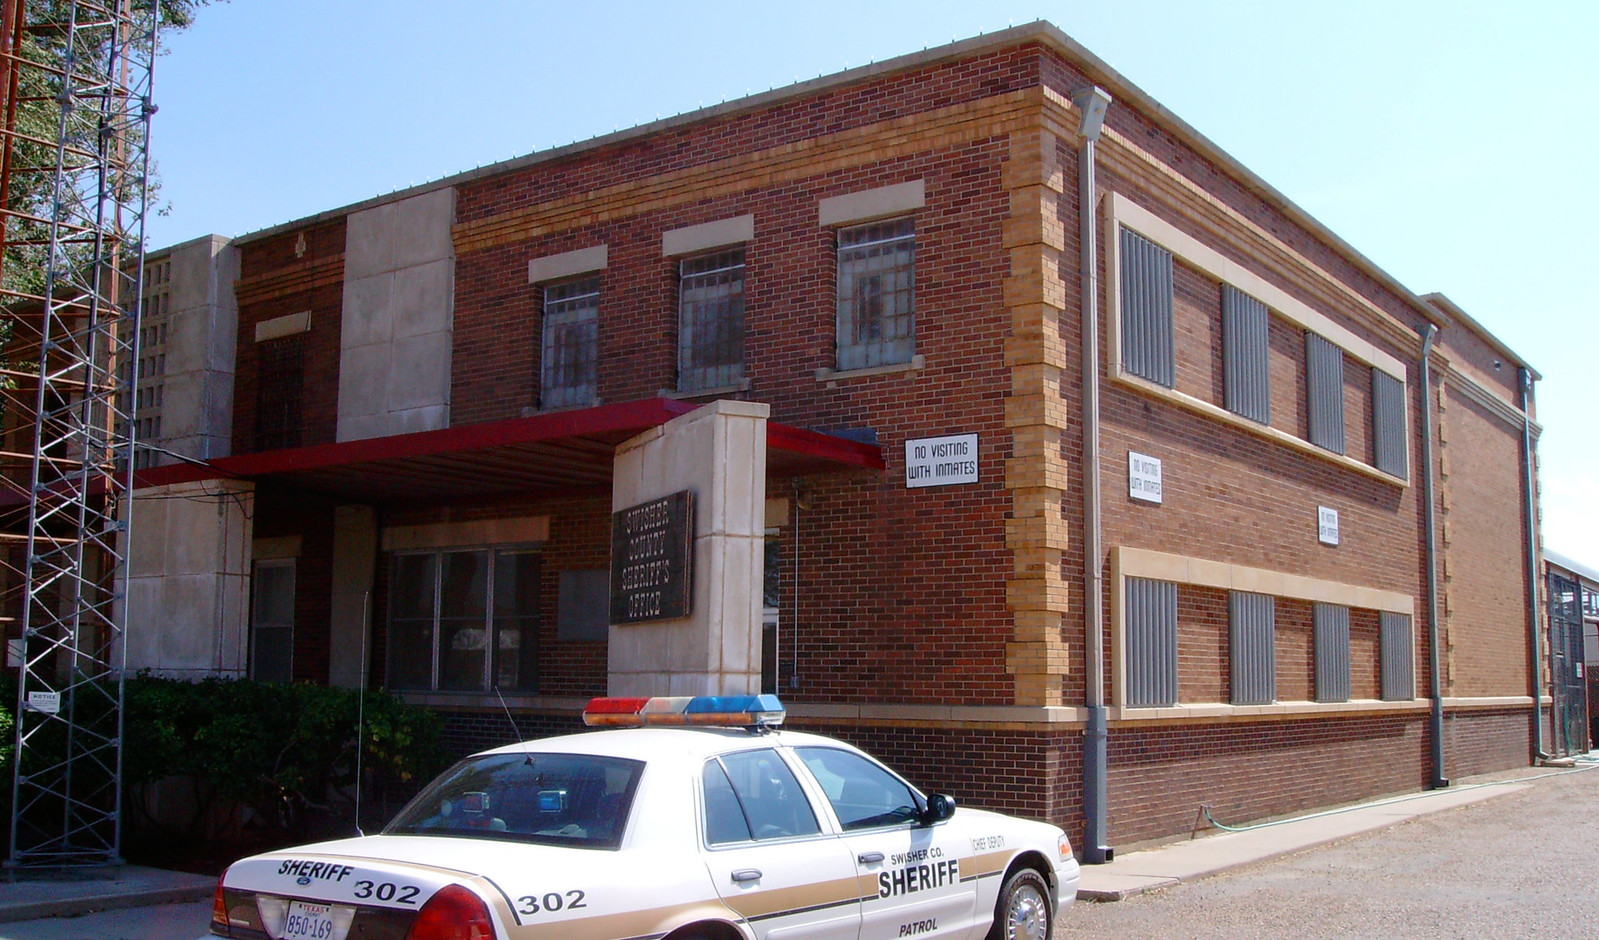 Image of Swisher County Sheriff's Office